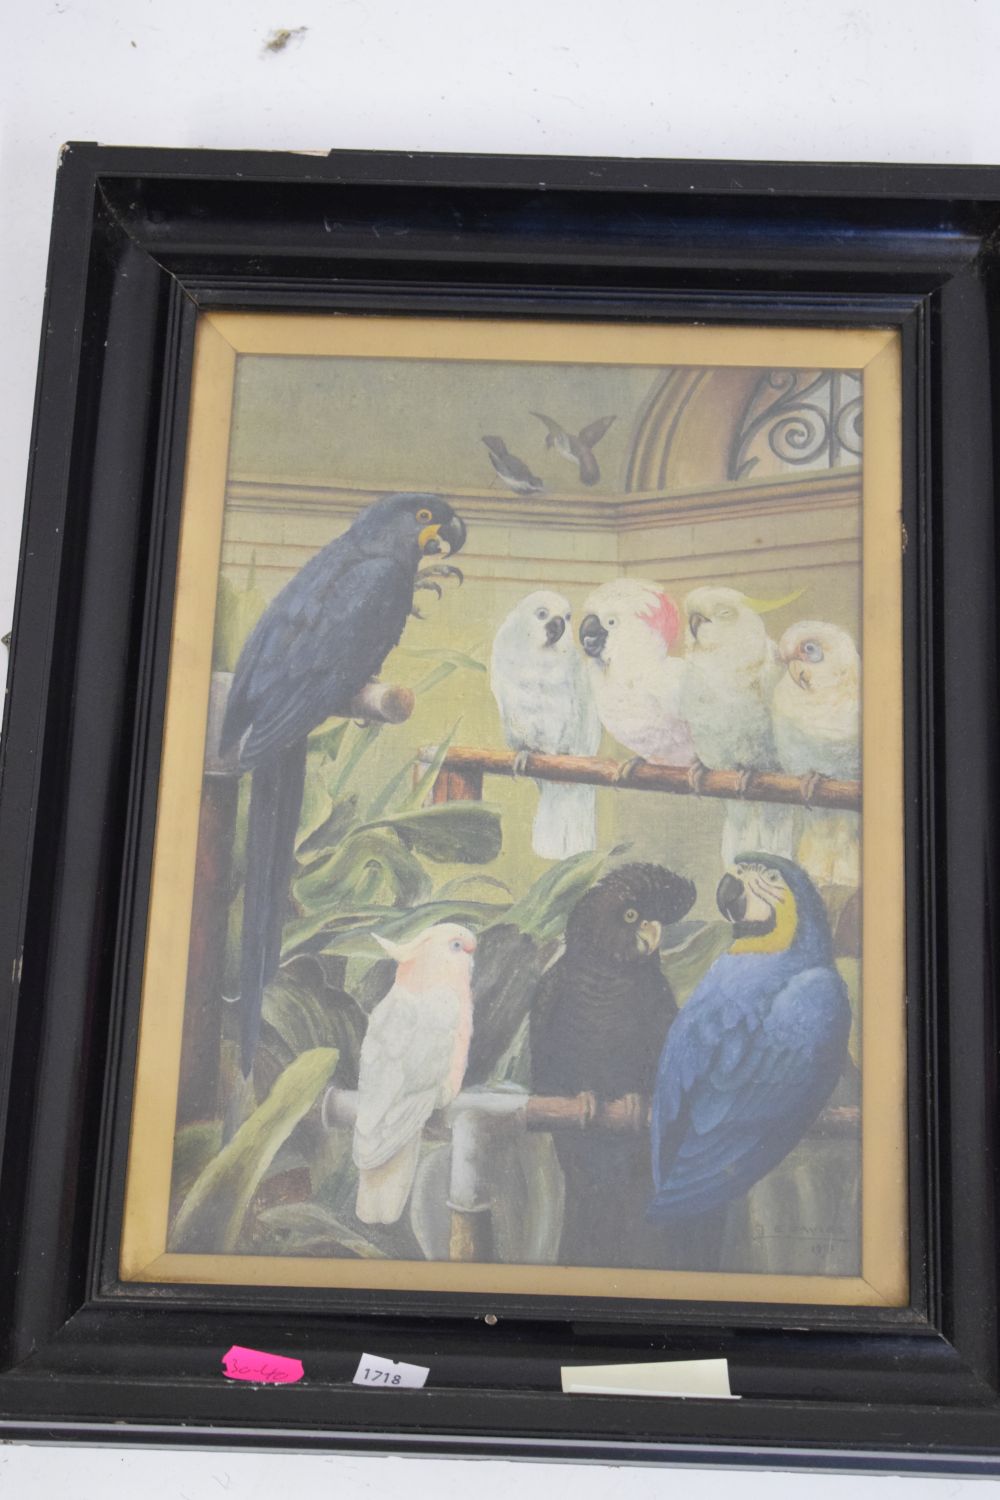 L.E. Davies (early 20th Century) - Oil on canvas - Aviary scene with blue parrots, parakeets, - Image 8 of 9